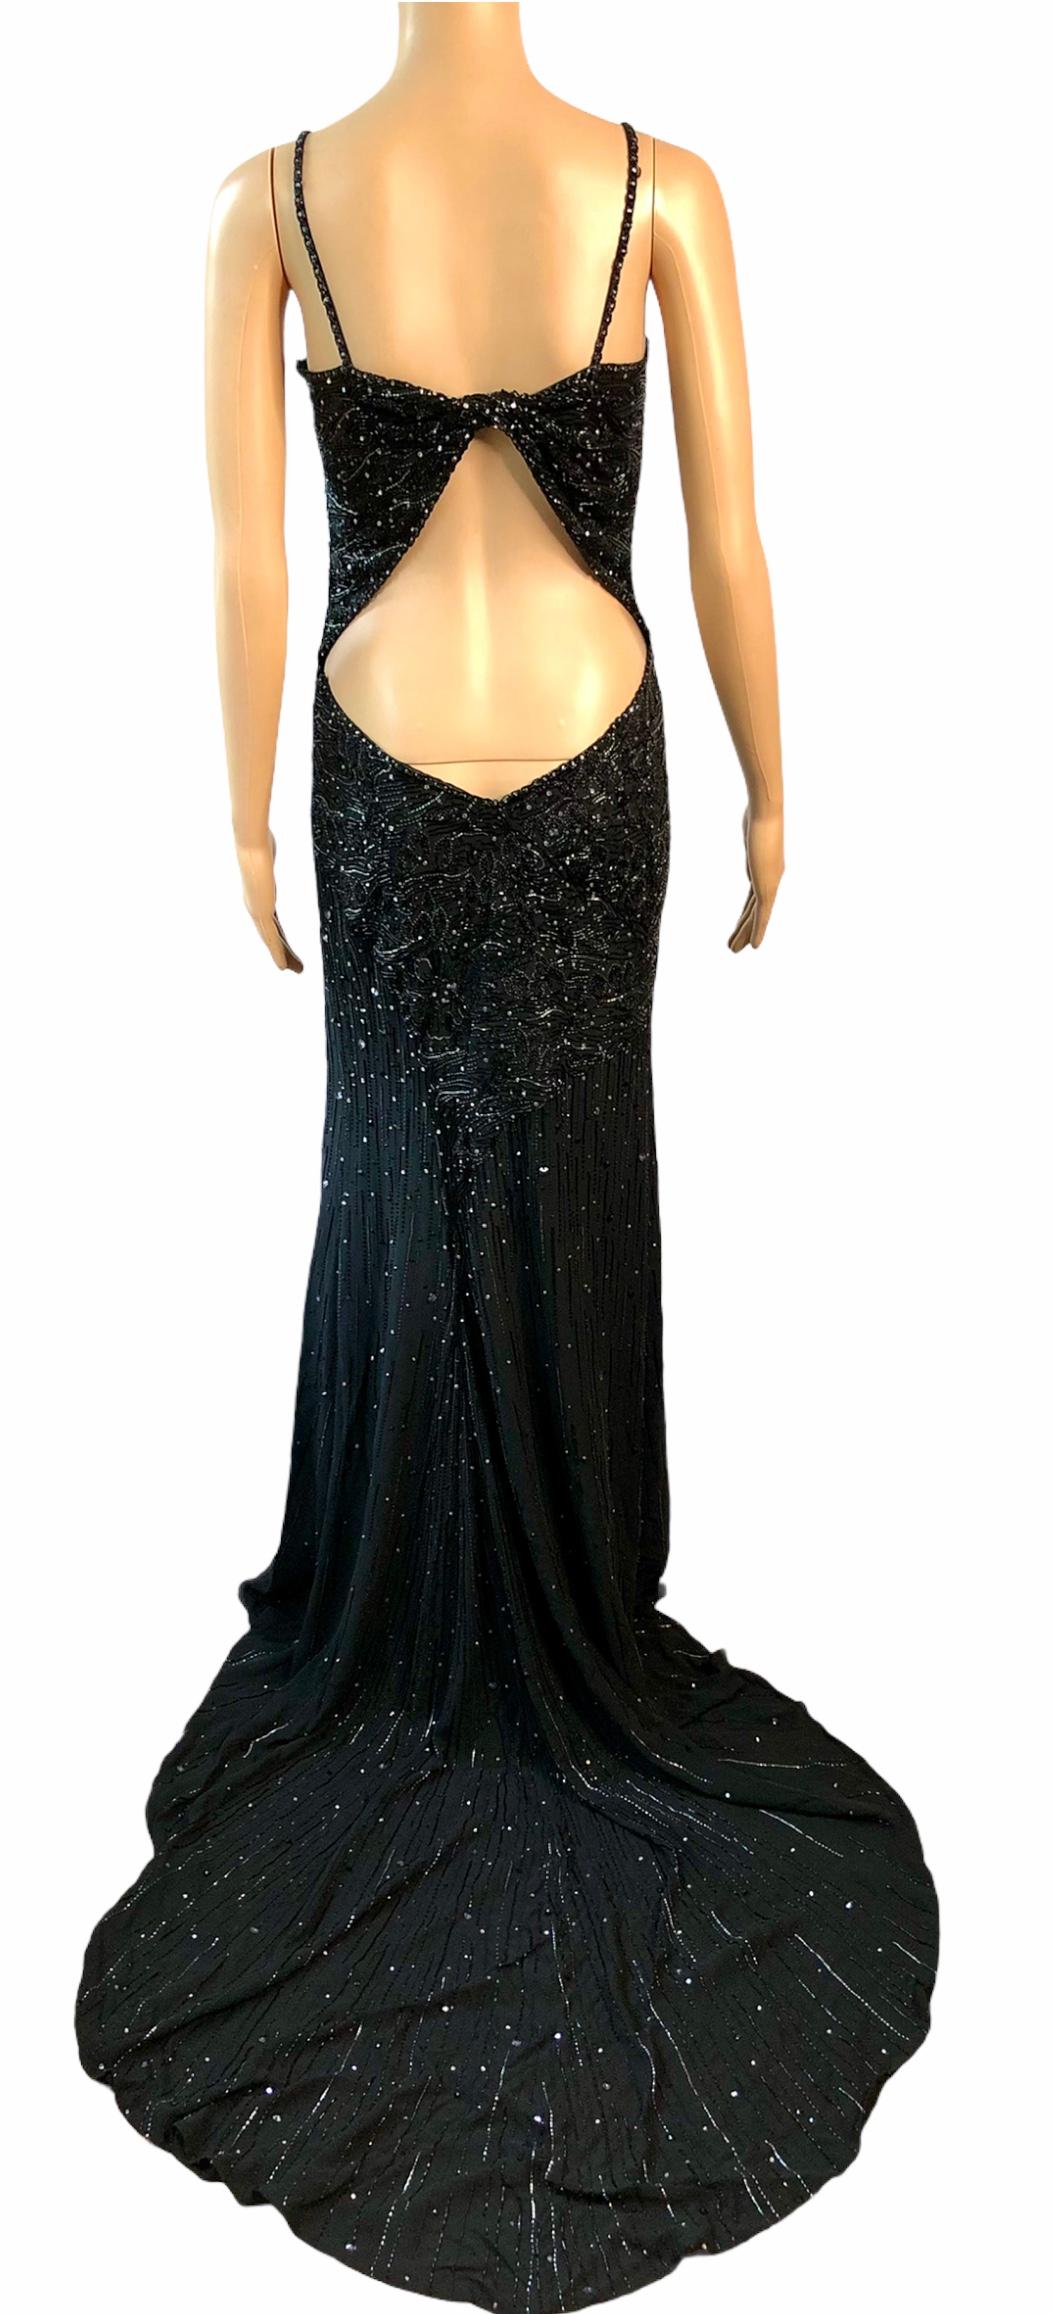 Black Atelier Versace Haute Couture F/W 1998 Crystal Embellished Cutout Train Gown For Sale